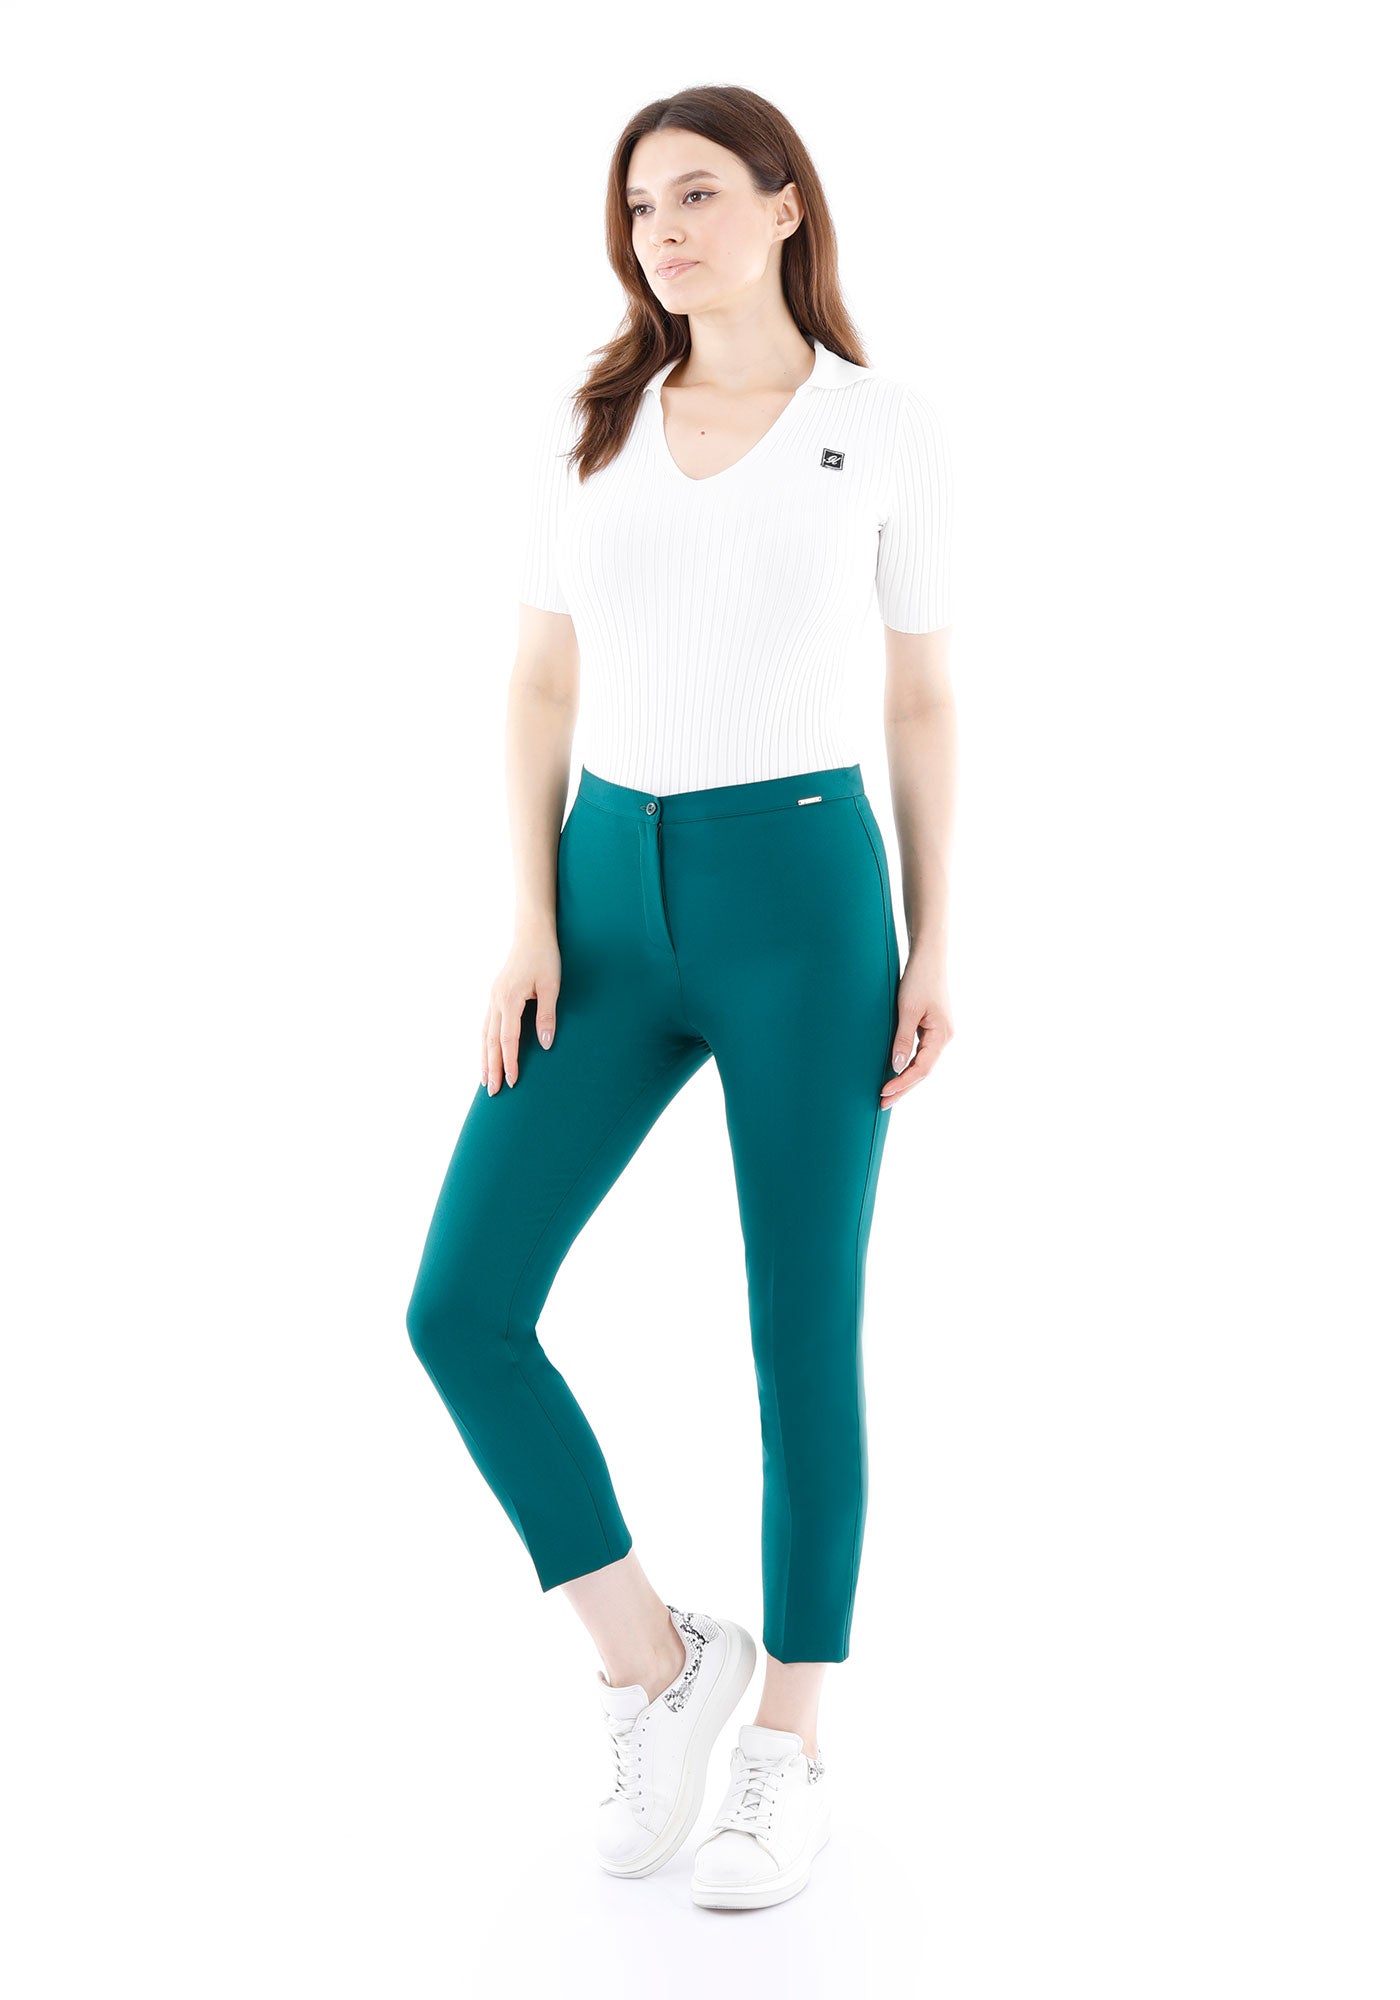 Copy of Copper Ankle-Length Slim-Fit/Skinny Pants for Women G-Line